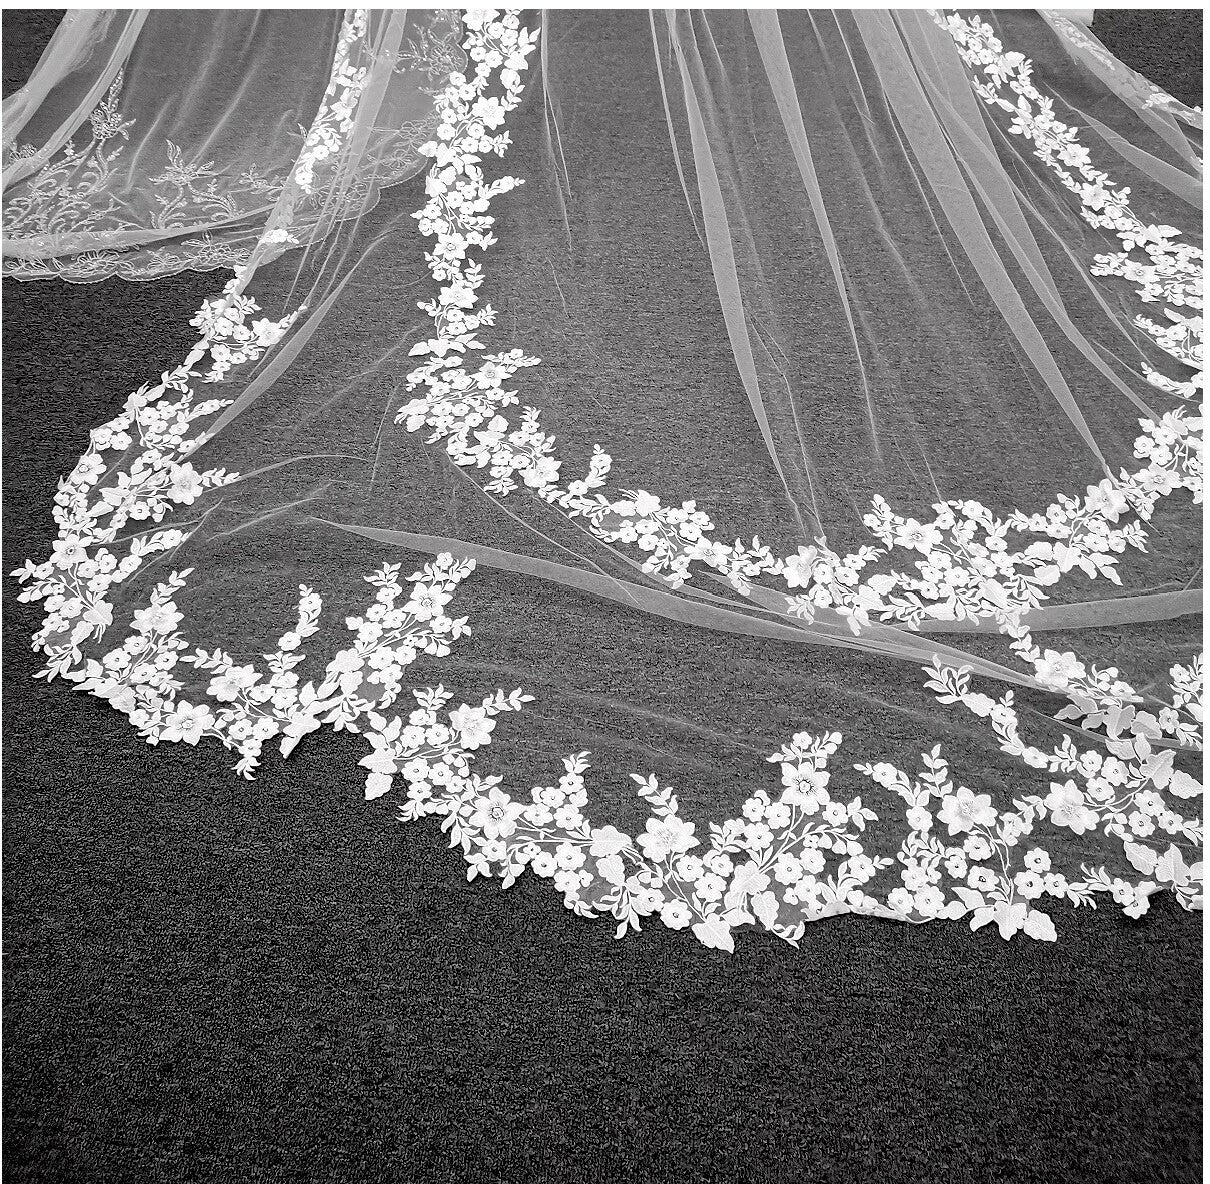 Fatima - Italian collection double lace cathedral veil